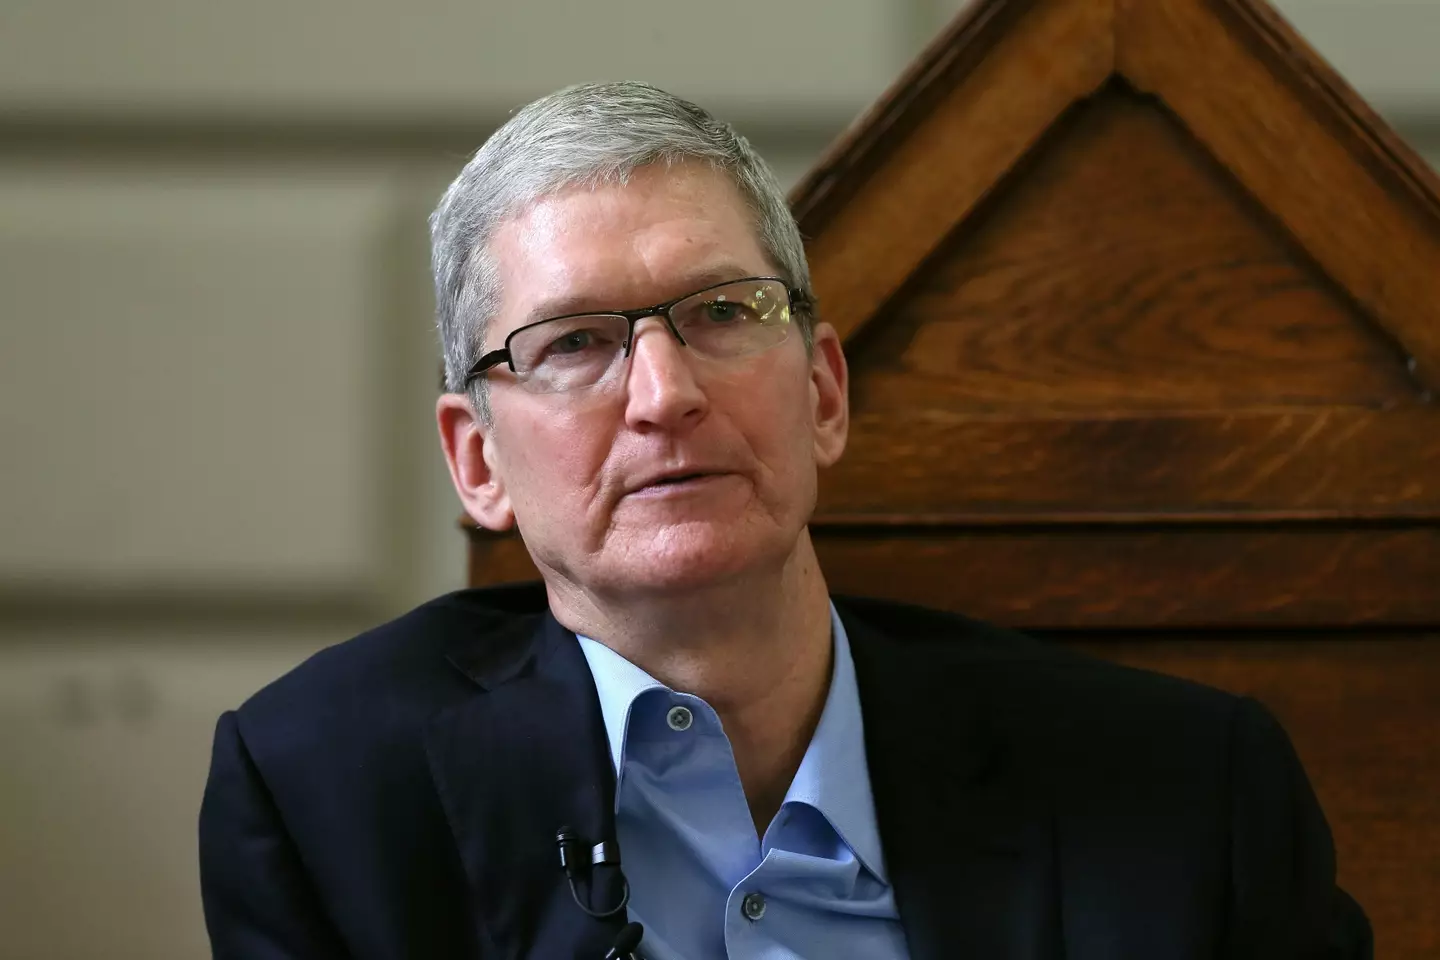 Tim Cook said anyone who complains about green bubbles should buy an iPhone.